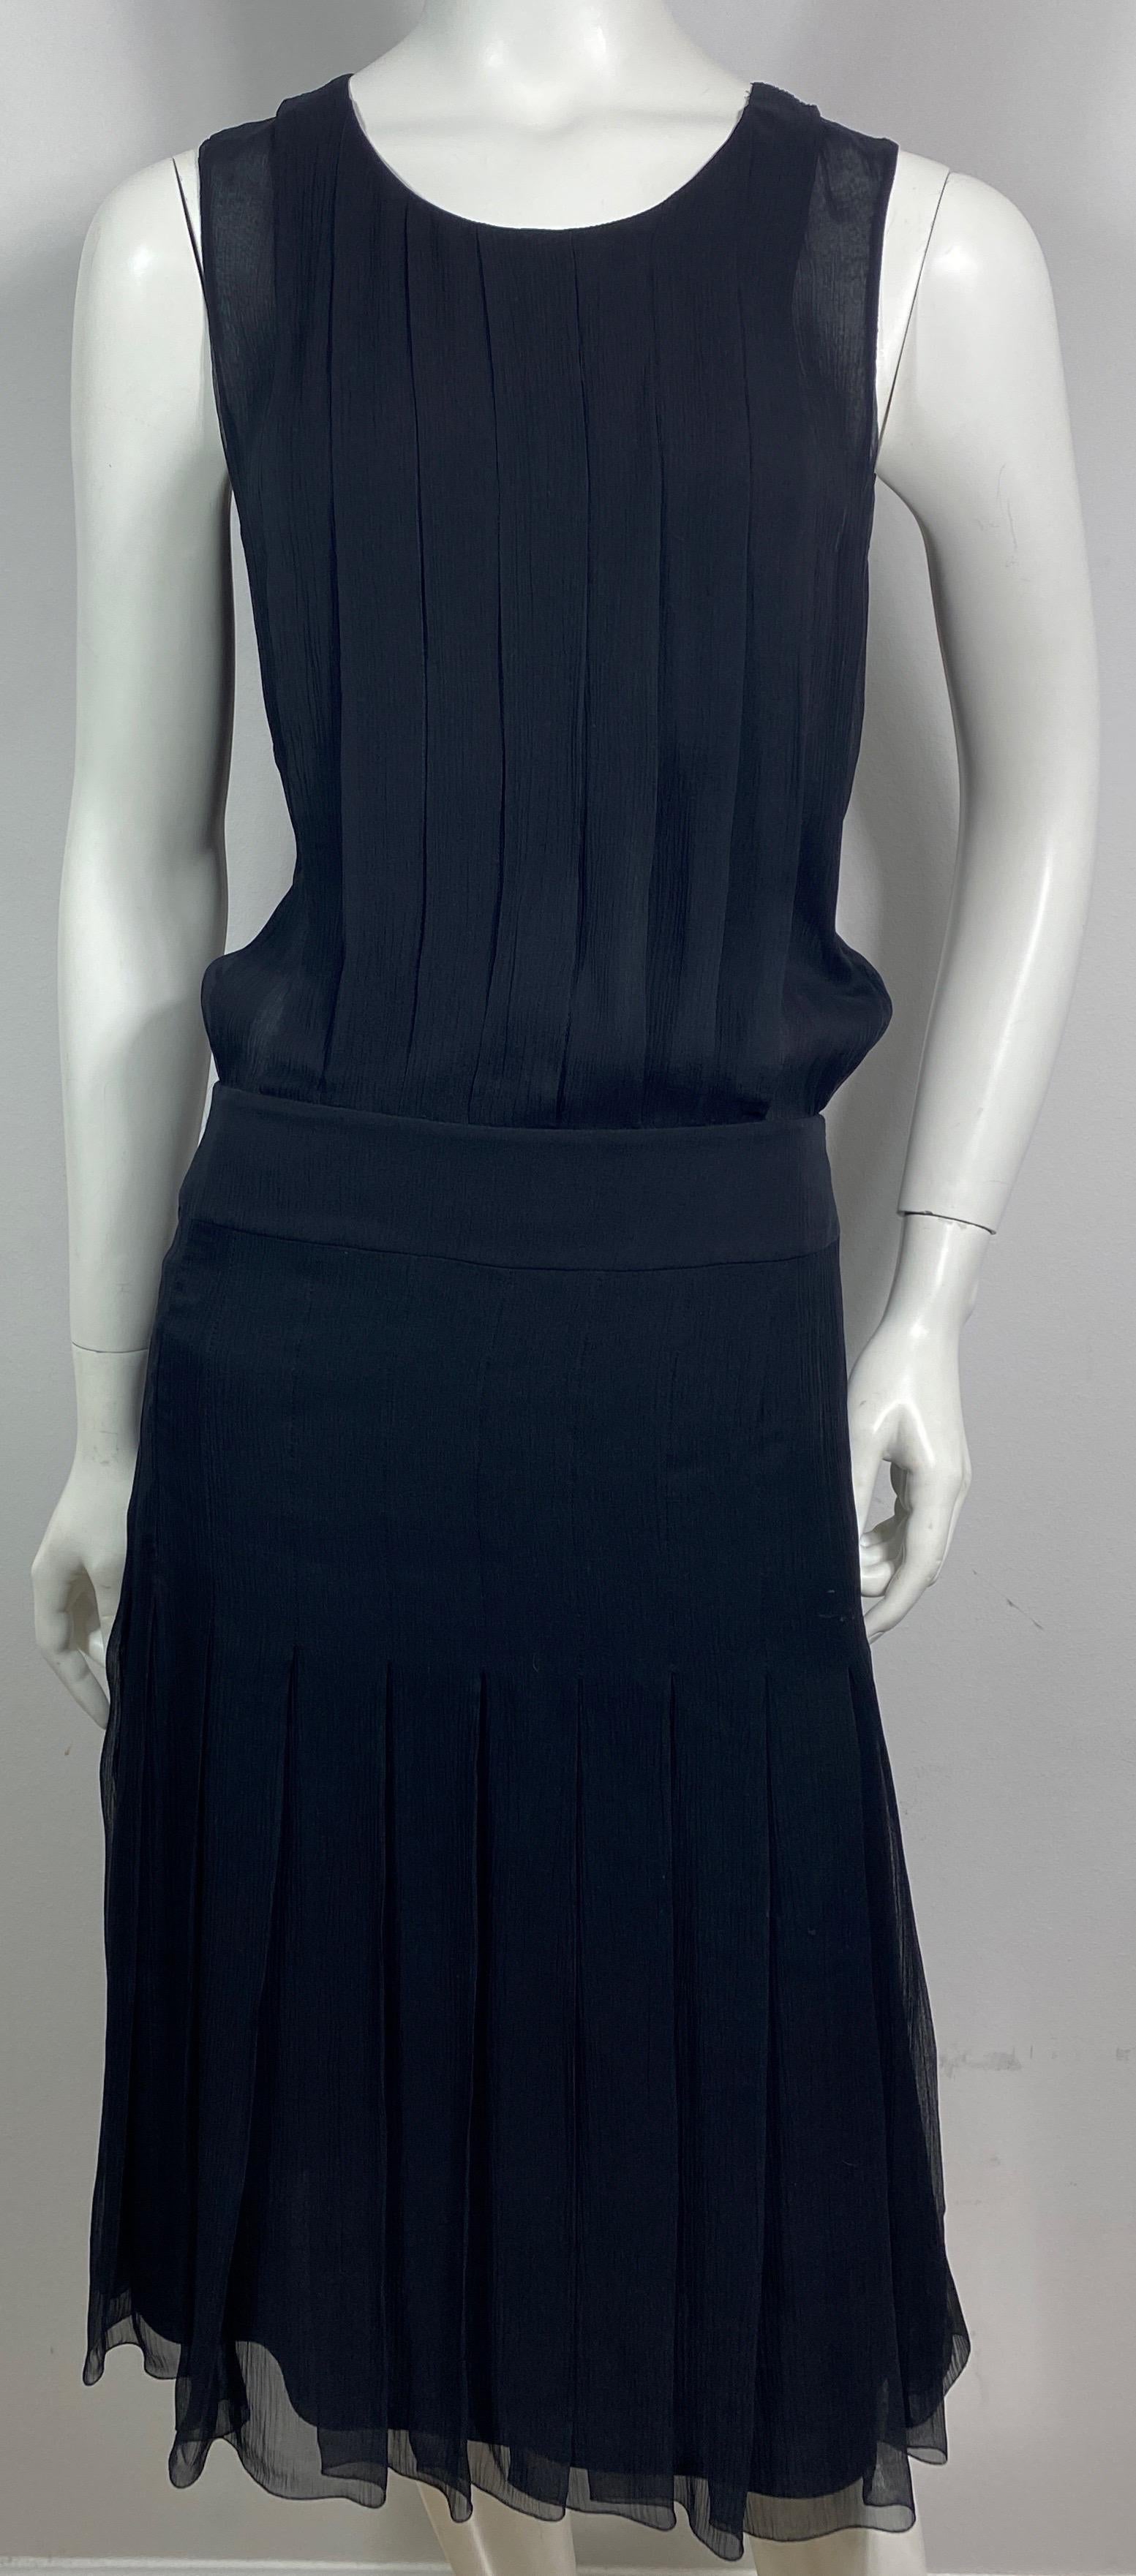 Chanel 2006C Black Silk Chiffon Sleeveless Dress-Size 40 This sleeveless black silk chiffon dress is from the 2006 Cruise Collection. The dress is made of a silk chiffon and is lined in a black silk, the sleeveless top is a pleated blousy cut that